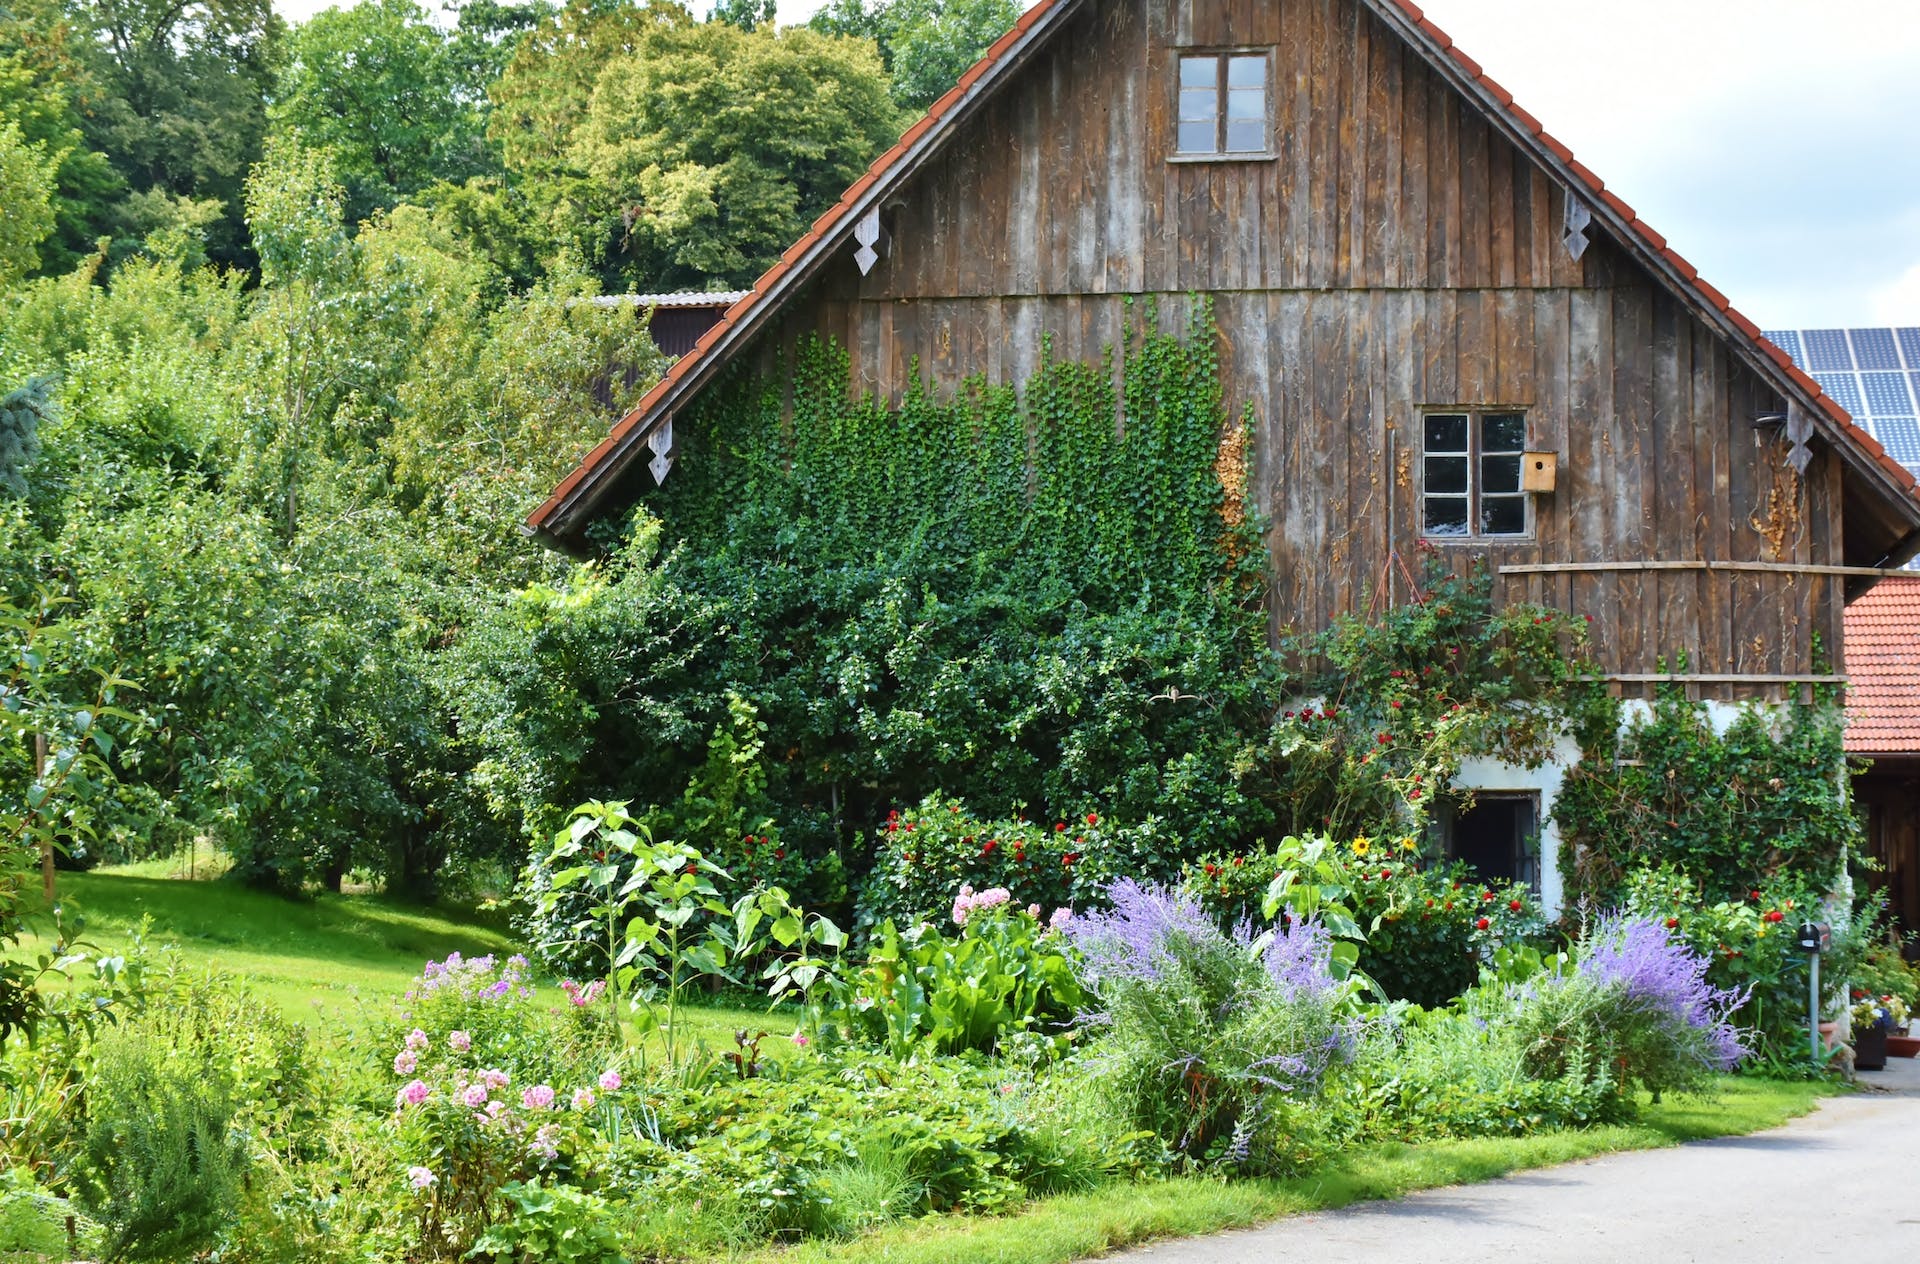 A wooden house surrounded by greenery | Source: Pexels